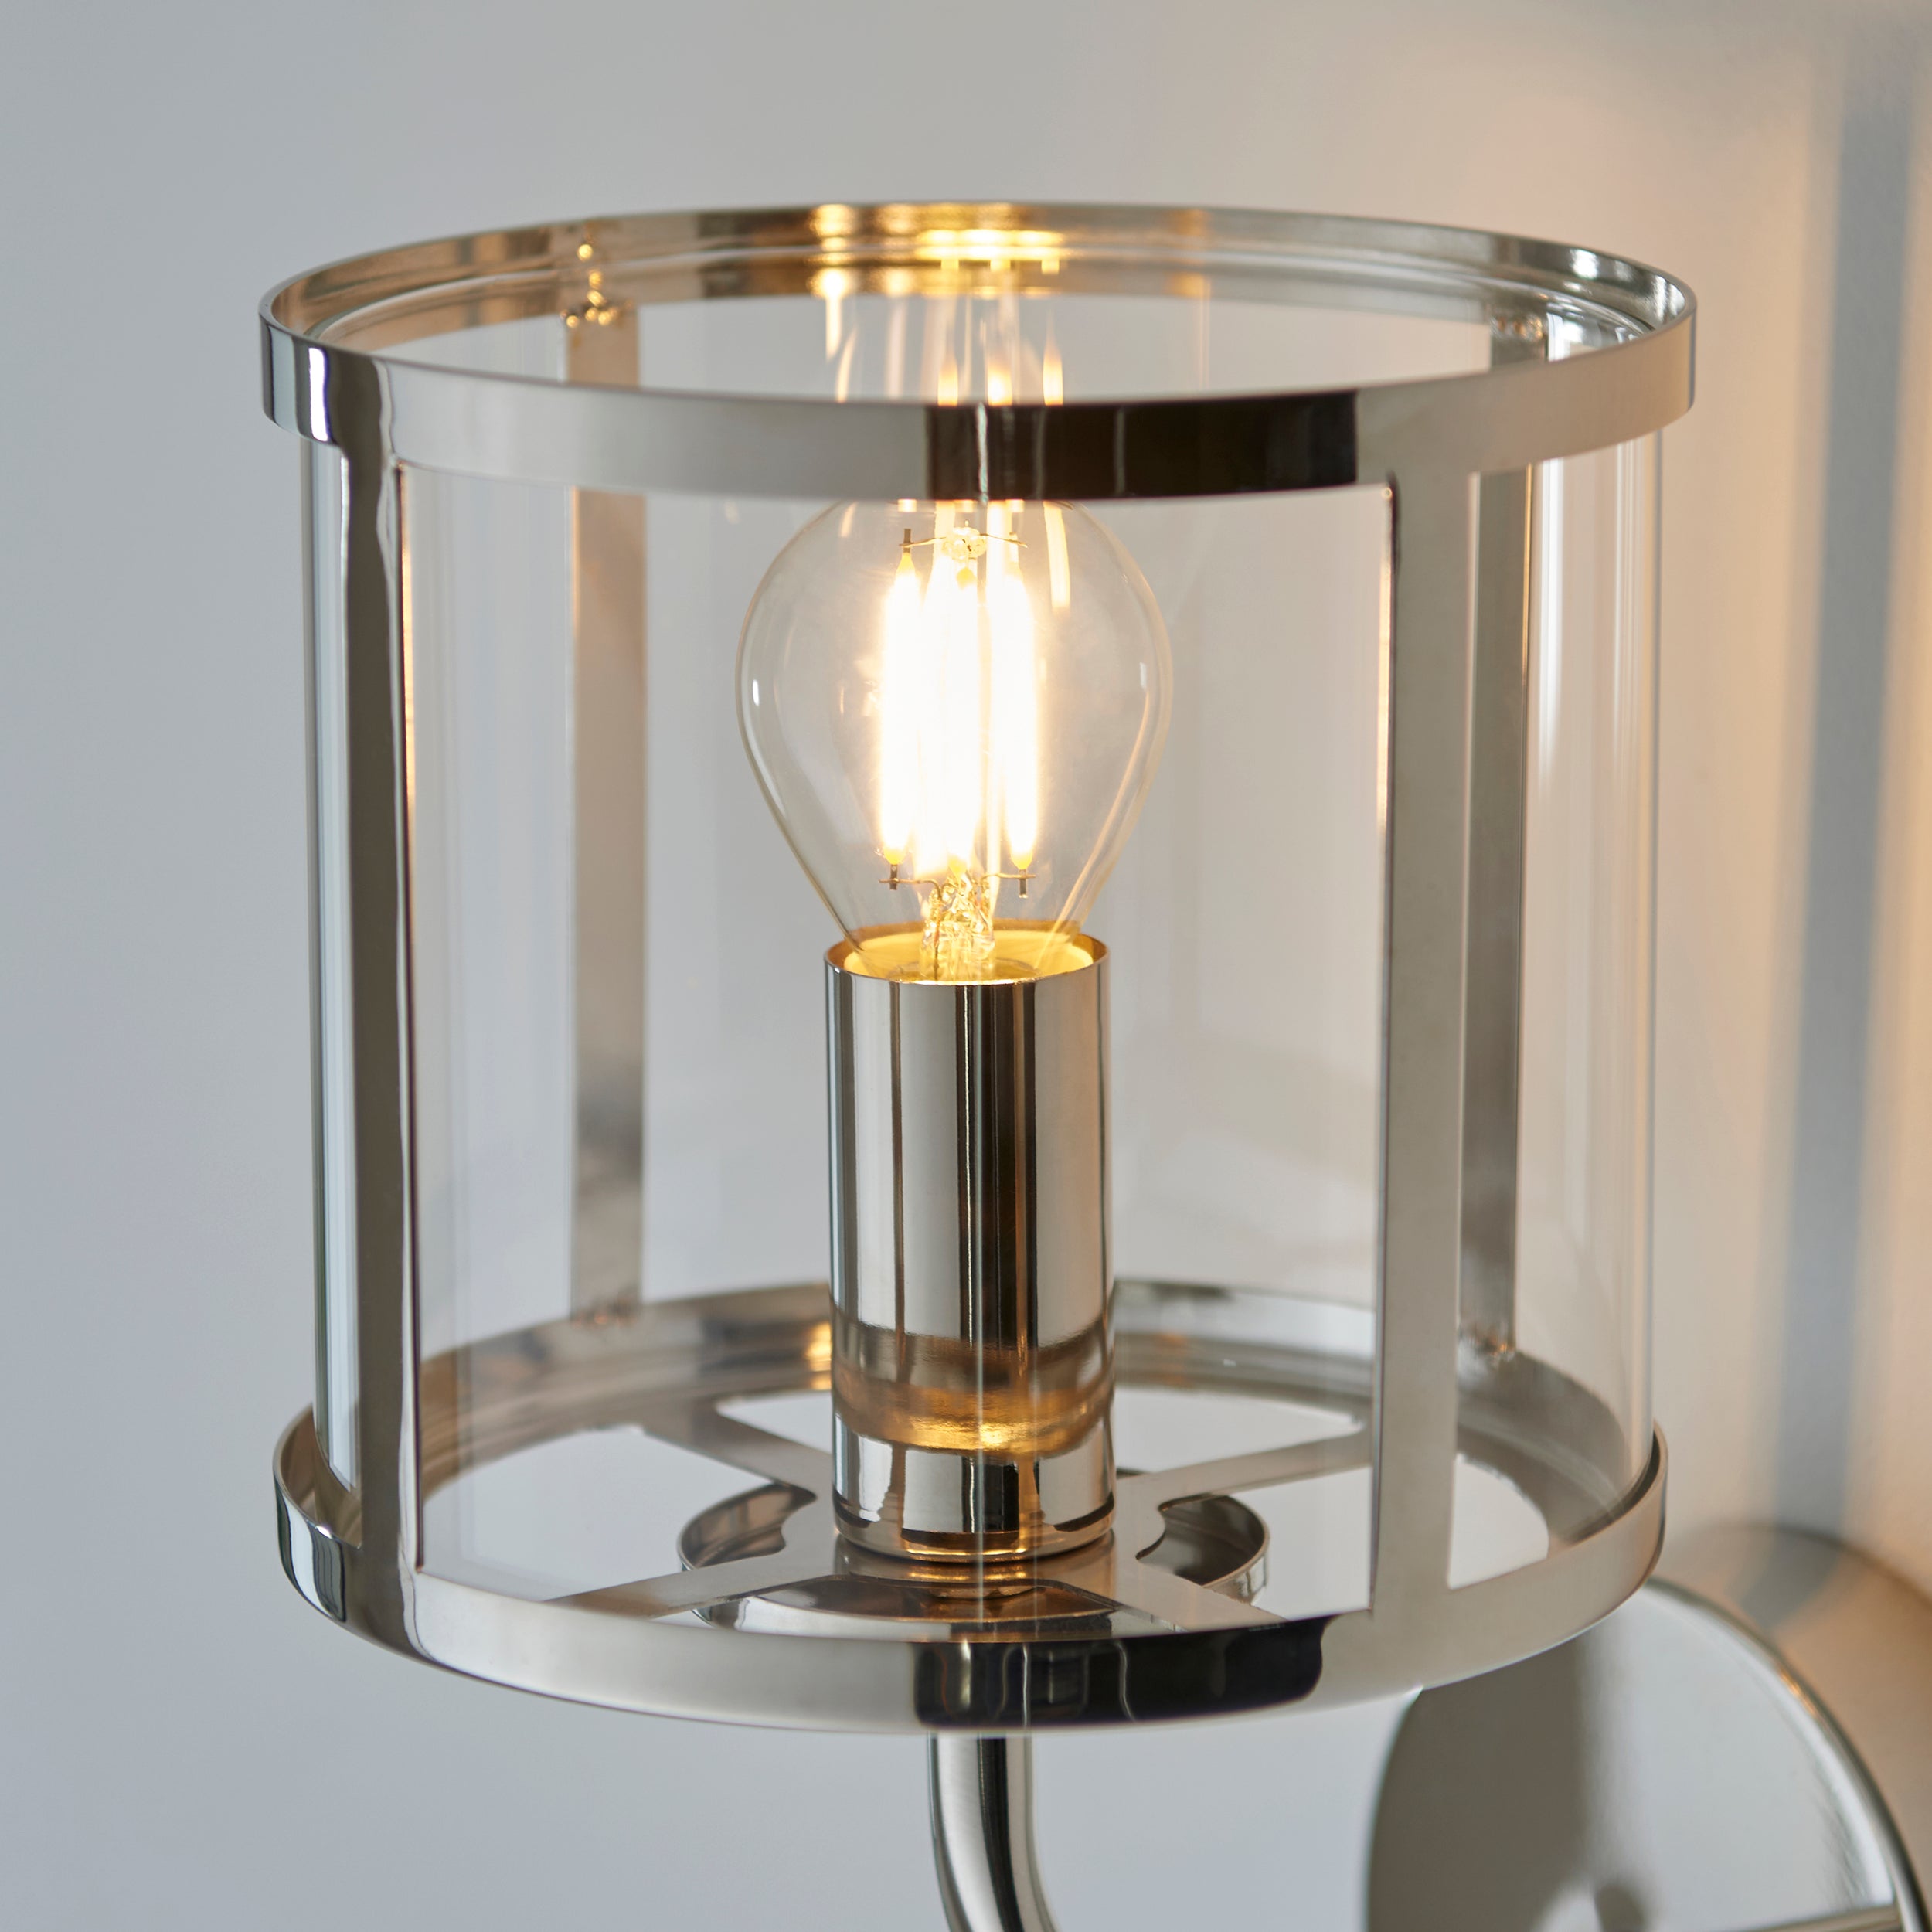 Hopton Simple Bright Nickel and Glass Wall Light